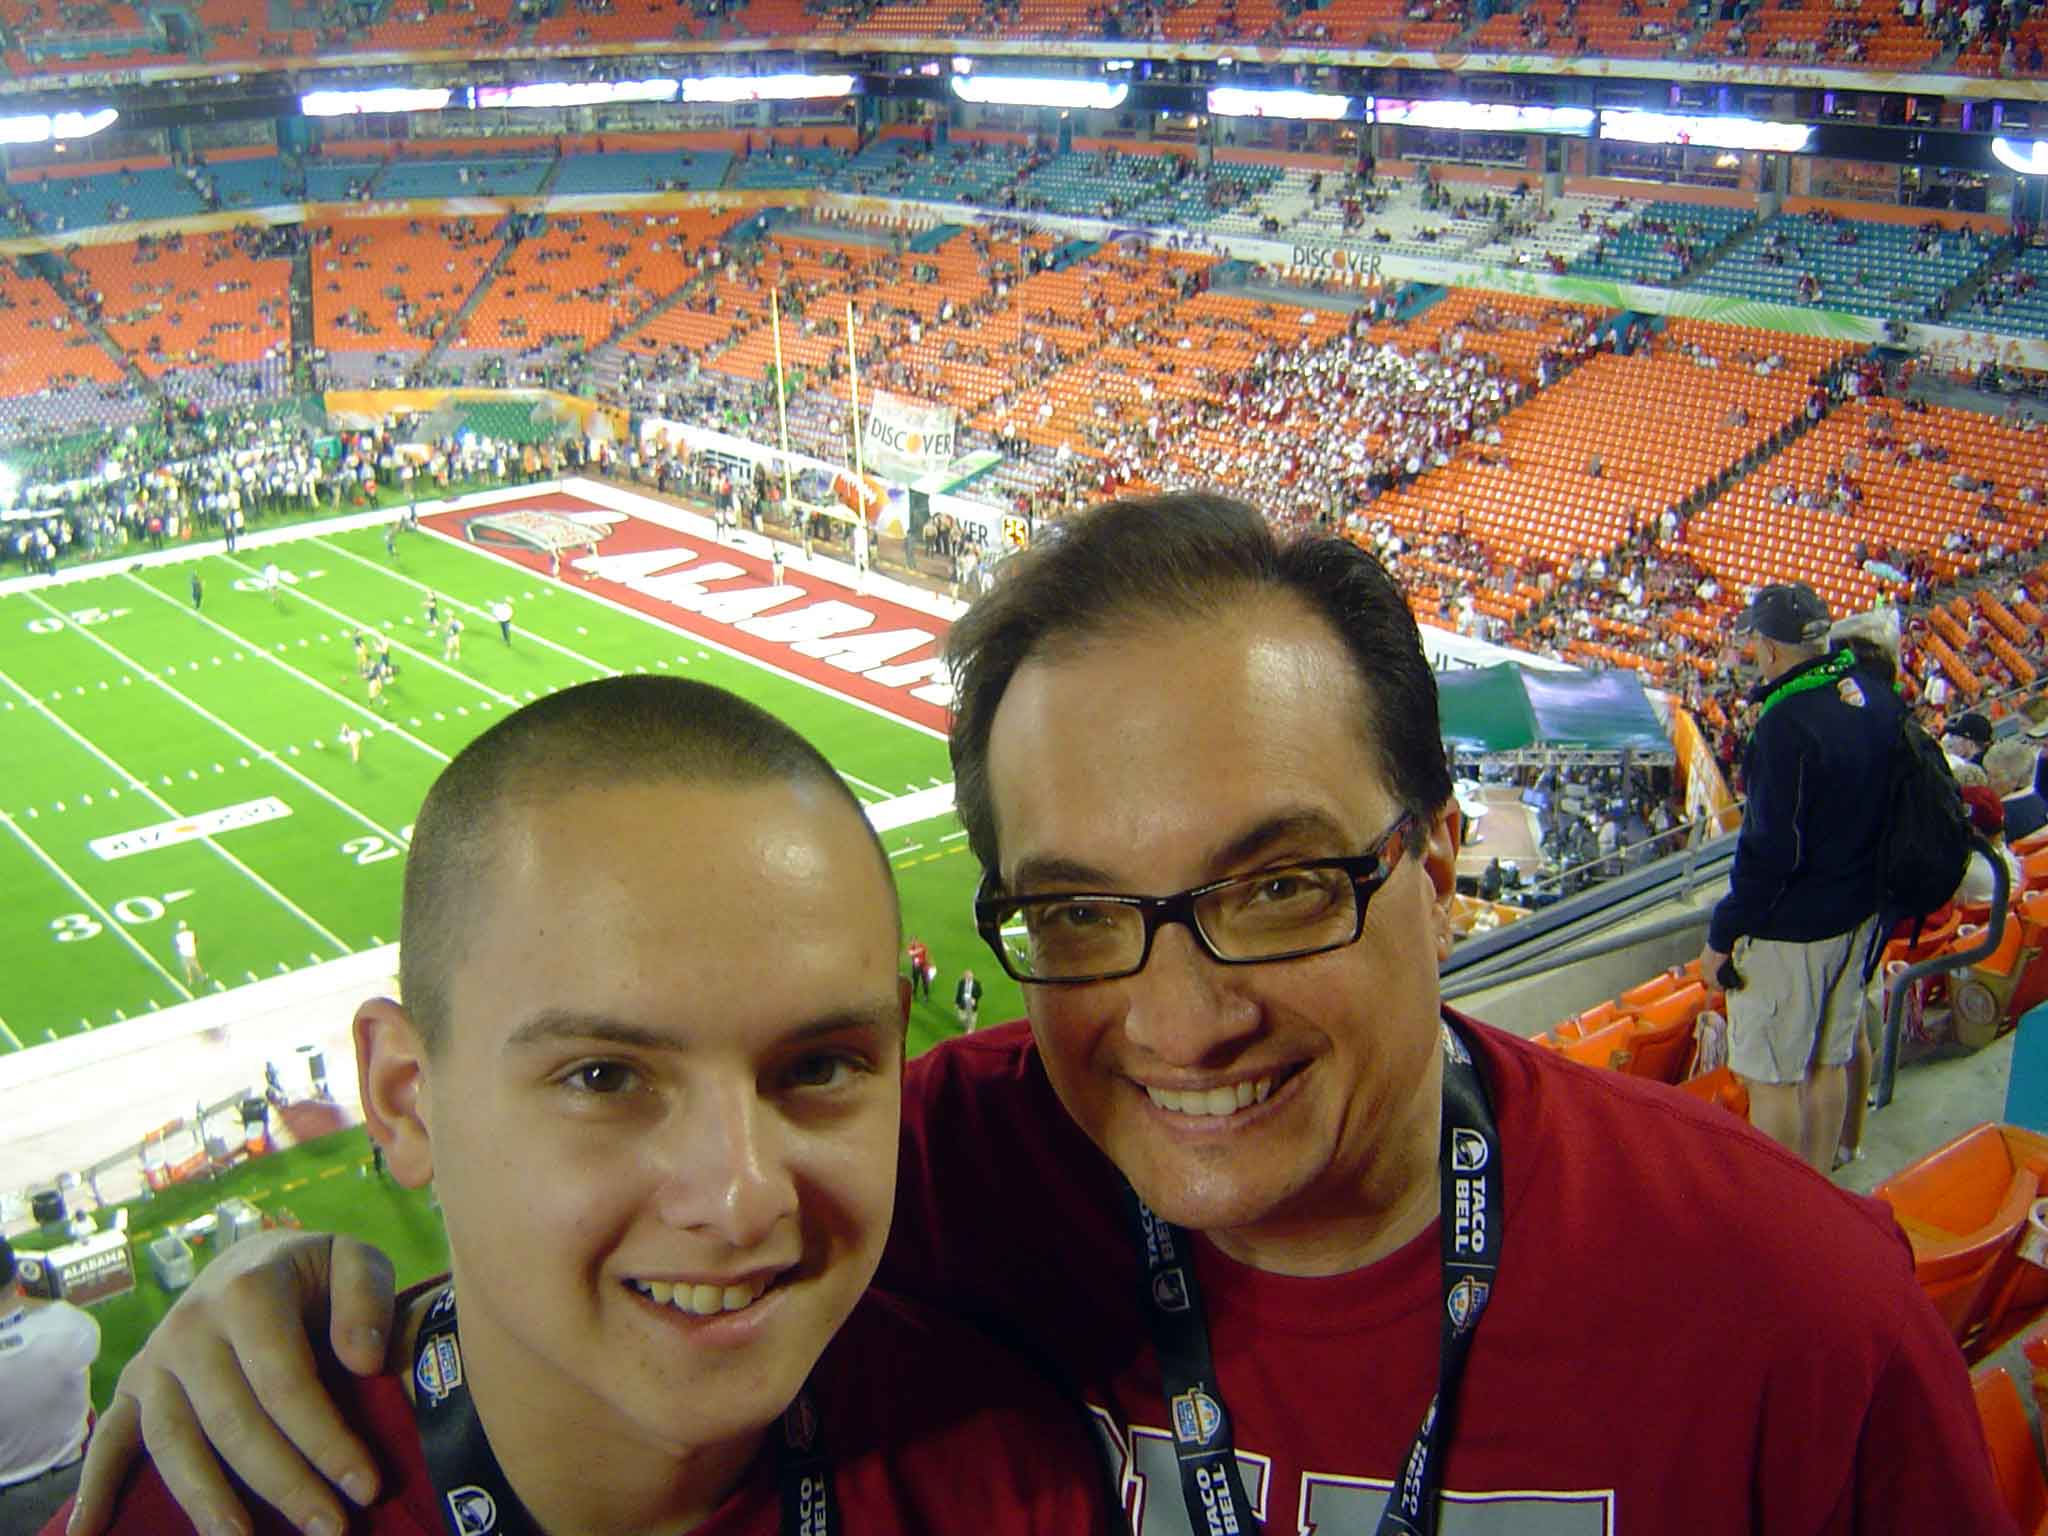 Jeff and Spence at the 2013 BCS Championship Game